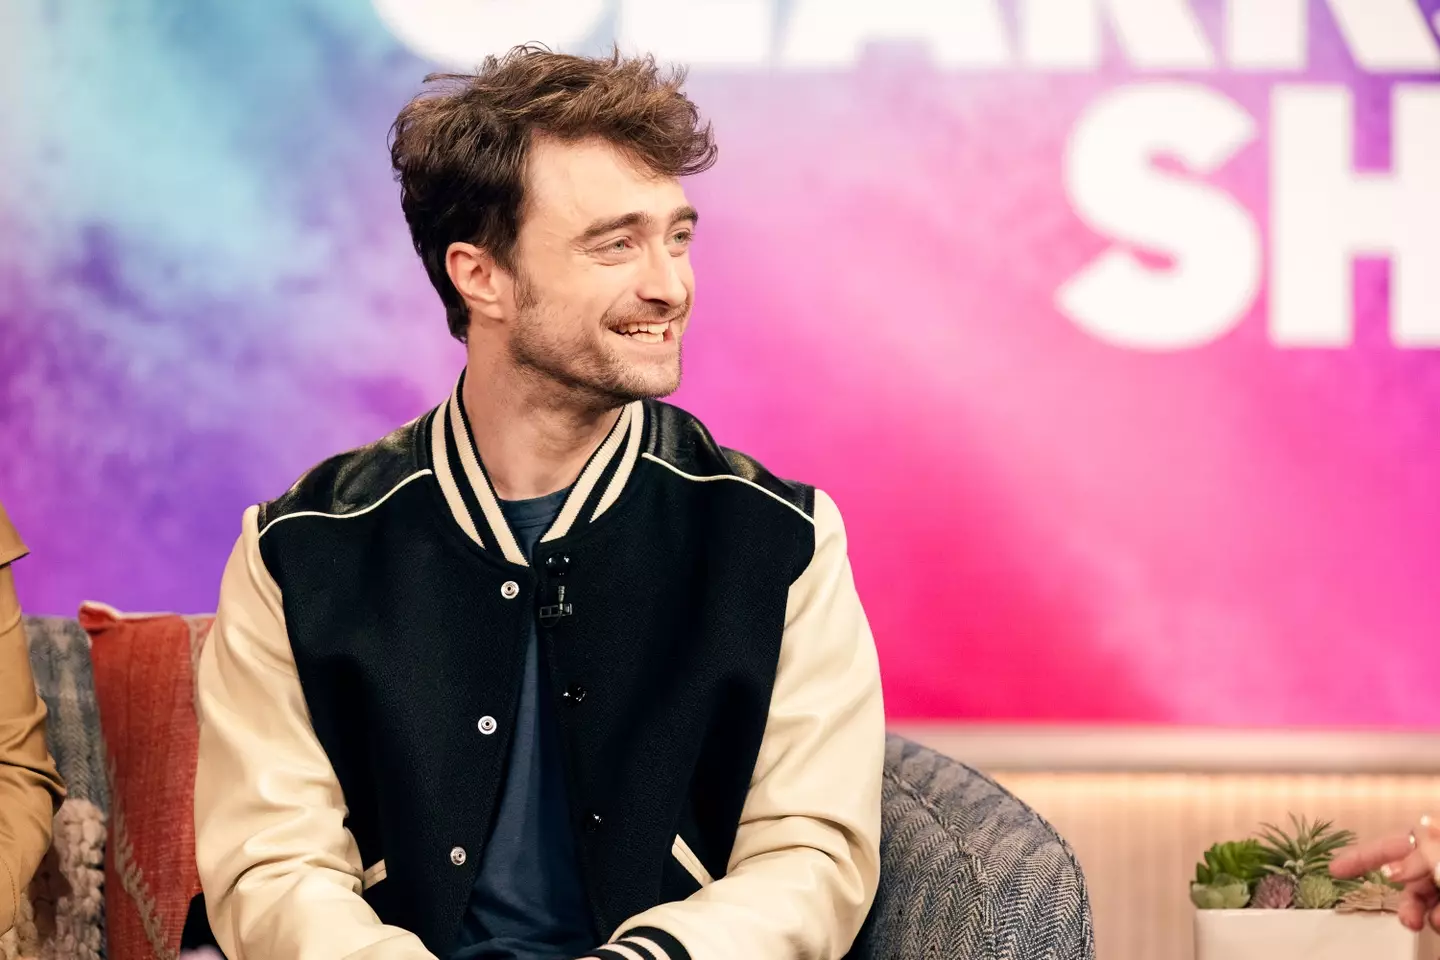 Daniel Radcliffe said he took to drinking to cope with the pressures of fame from Harry Potter days.